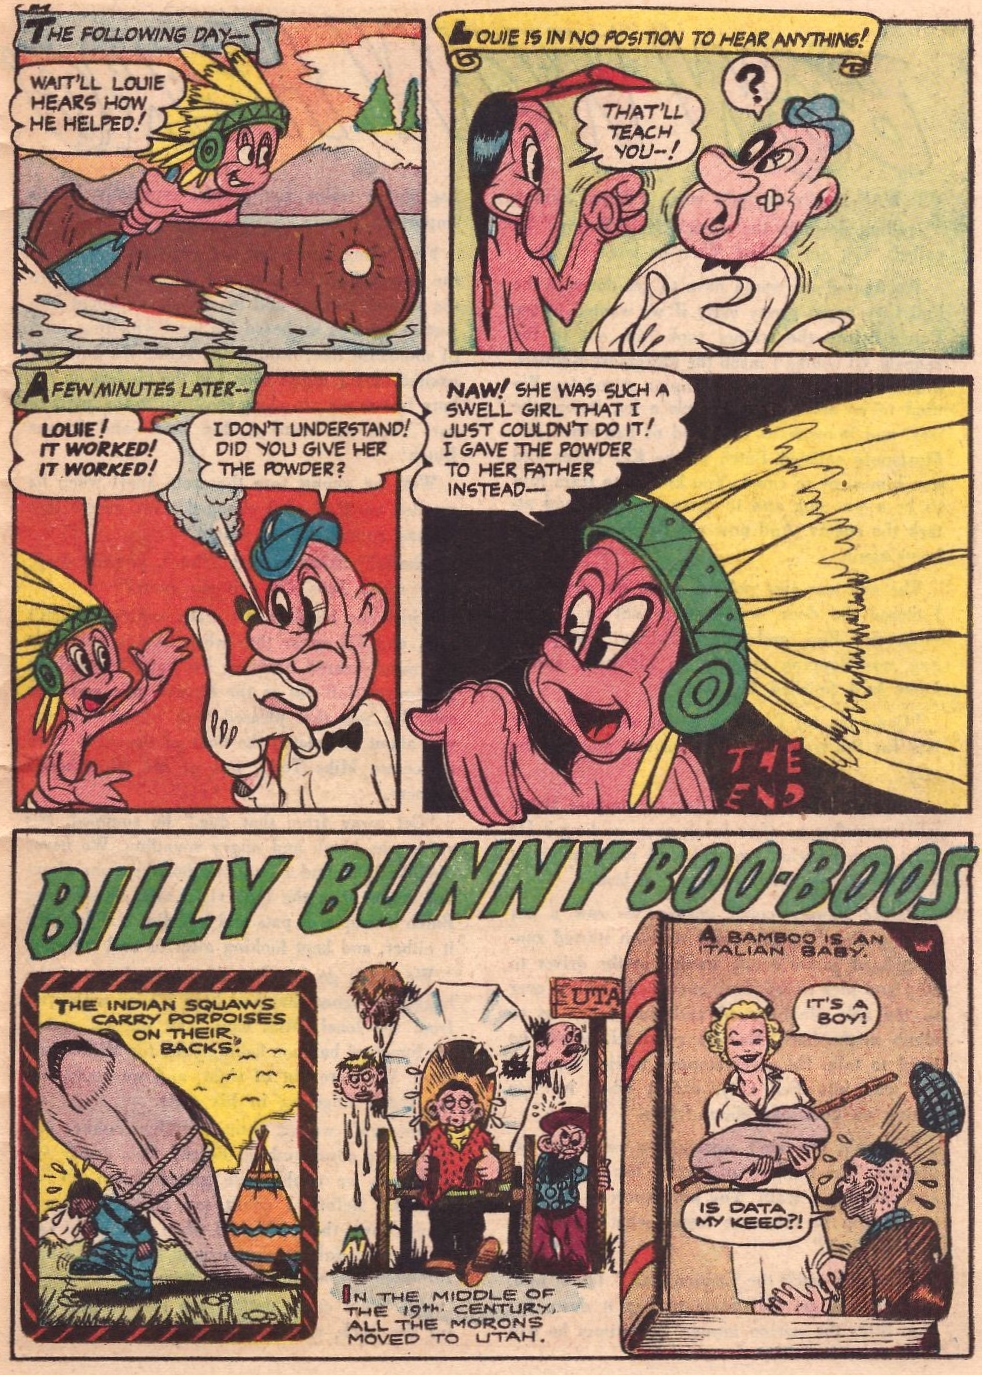 Read online Billy Bunny comic -  Issue #4 - 25